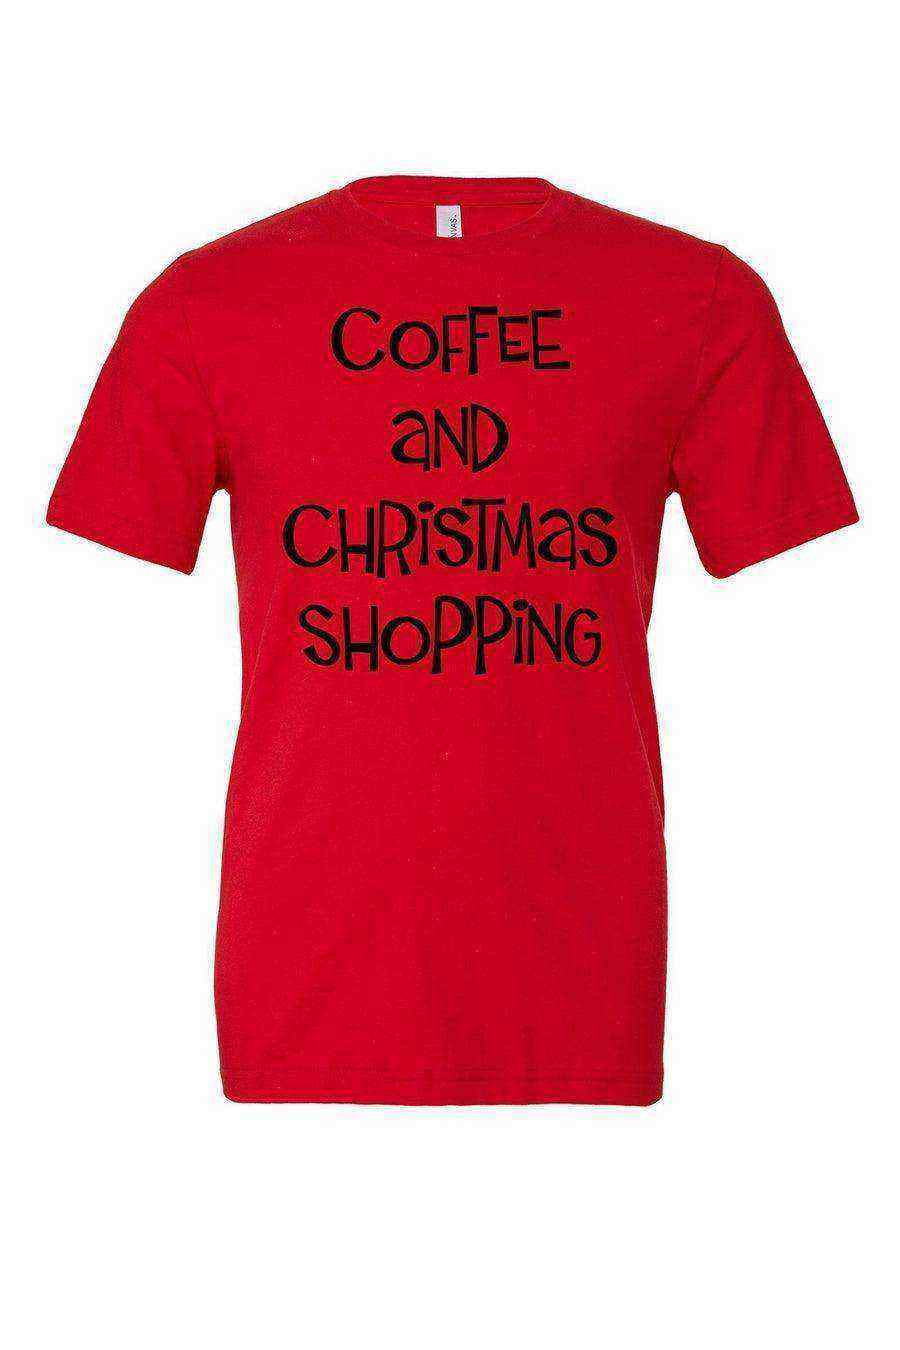 Coffee and Christmas Shopping Tee - Dylan's Tees